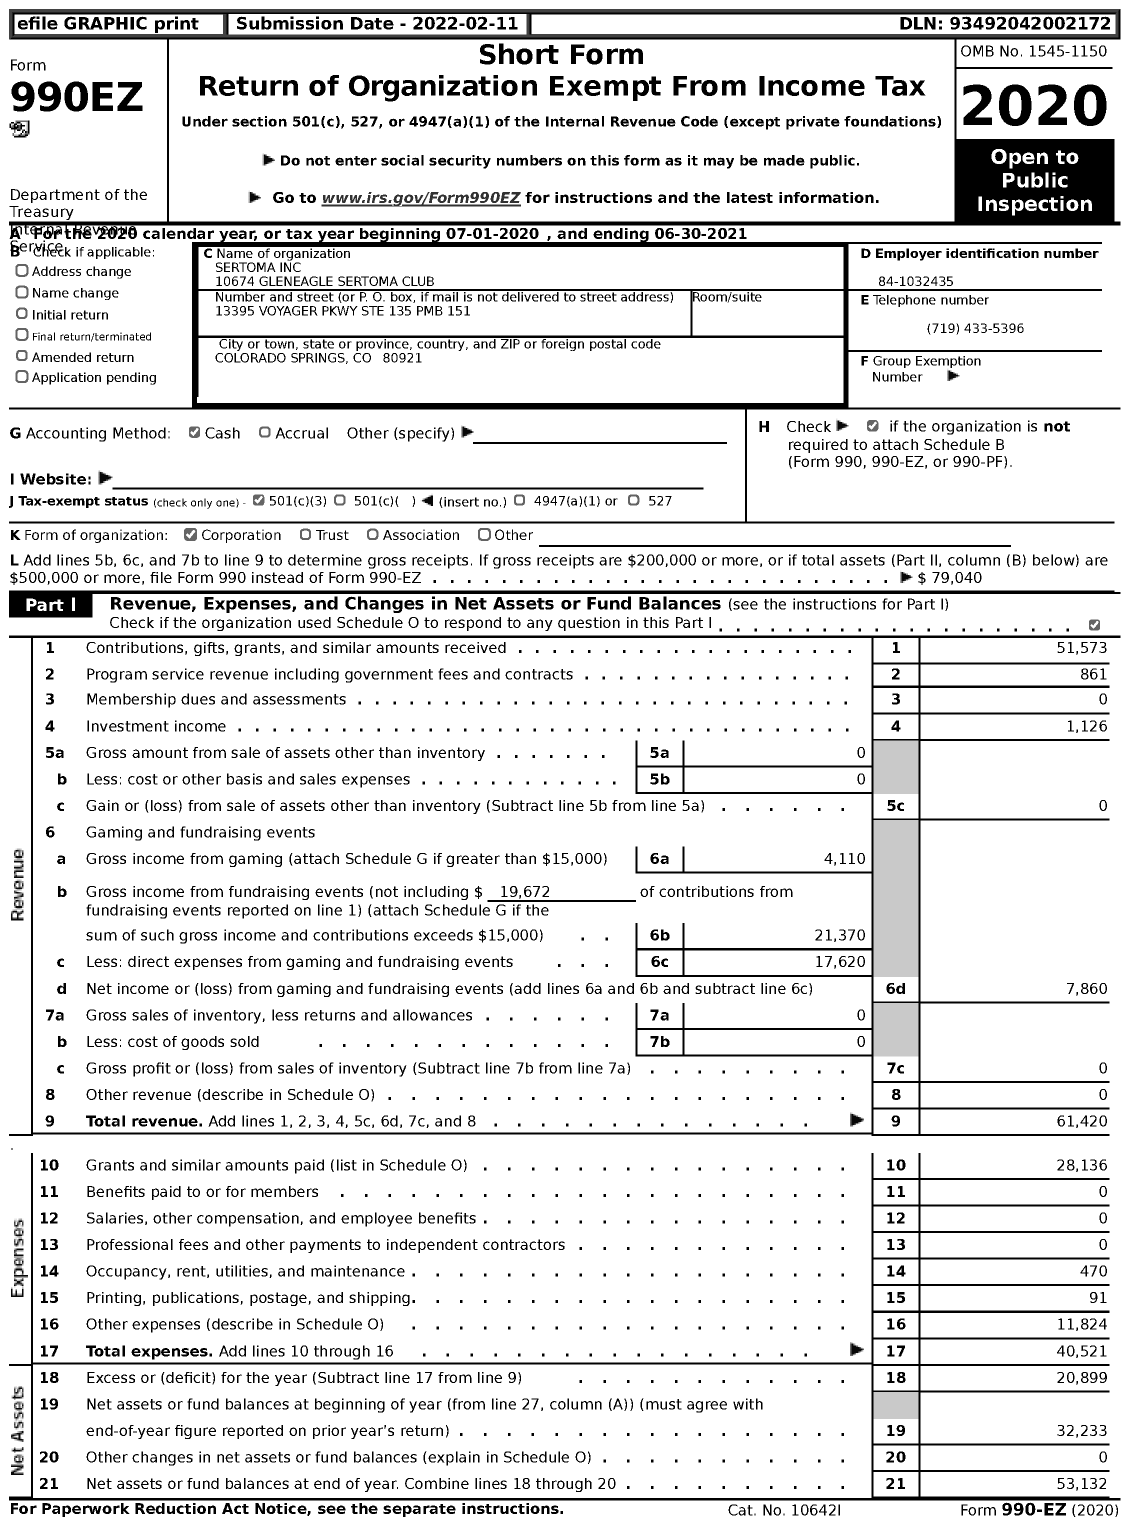 Image of first page of 2020 Form 990EZ for SERTOMA - 10674 Gleneagle SERTOMA Club